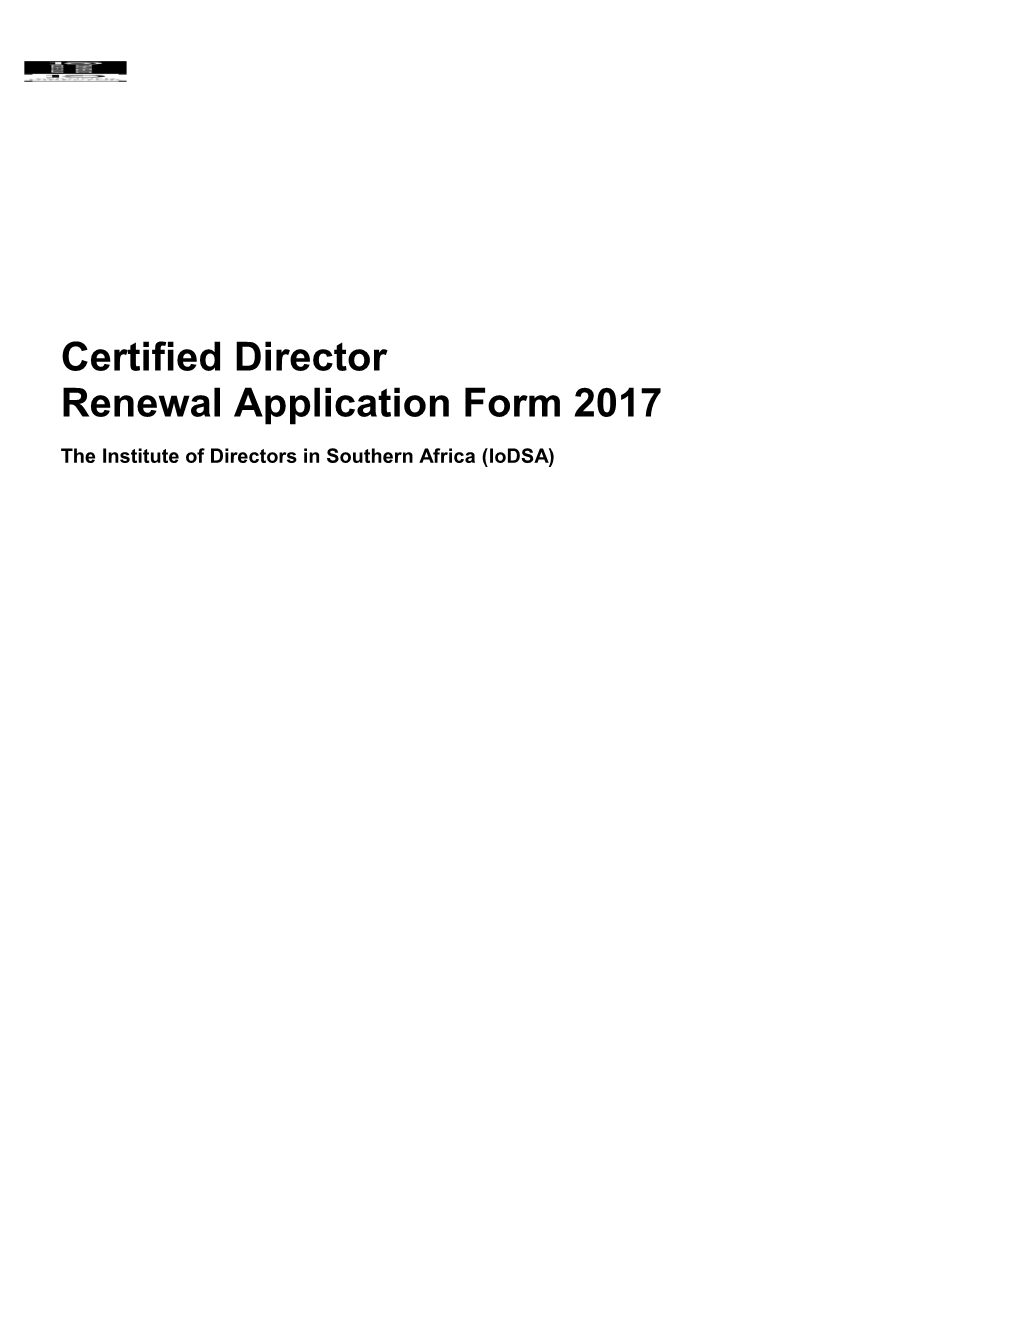 The Institute of Directors in Southern Africa (Iodsa)